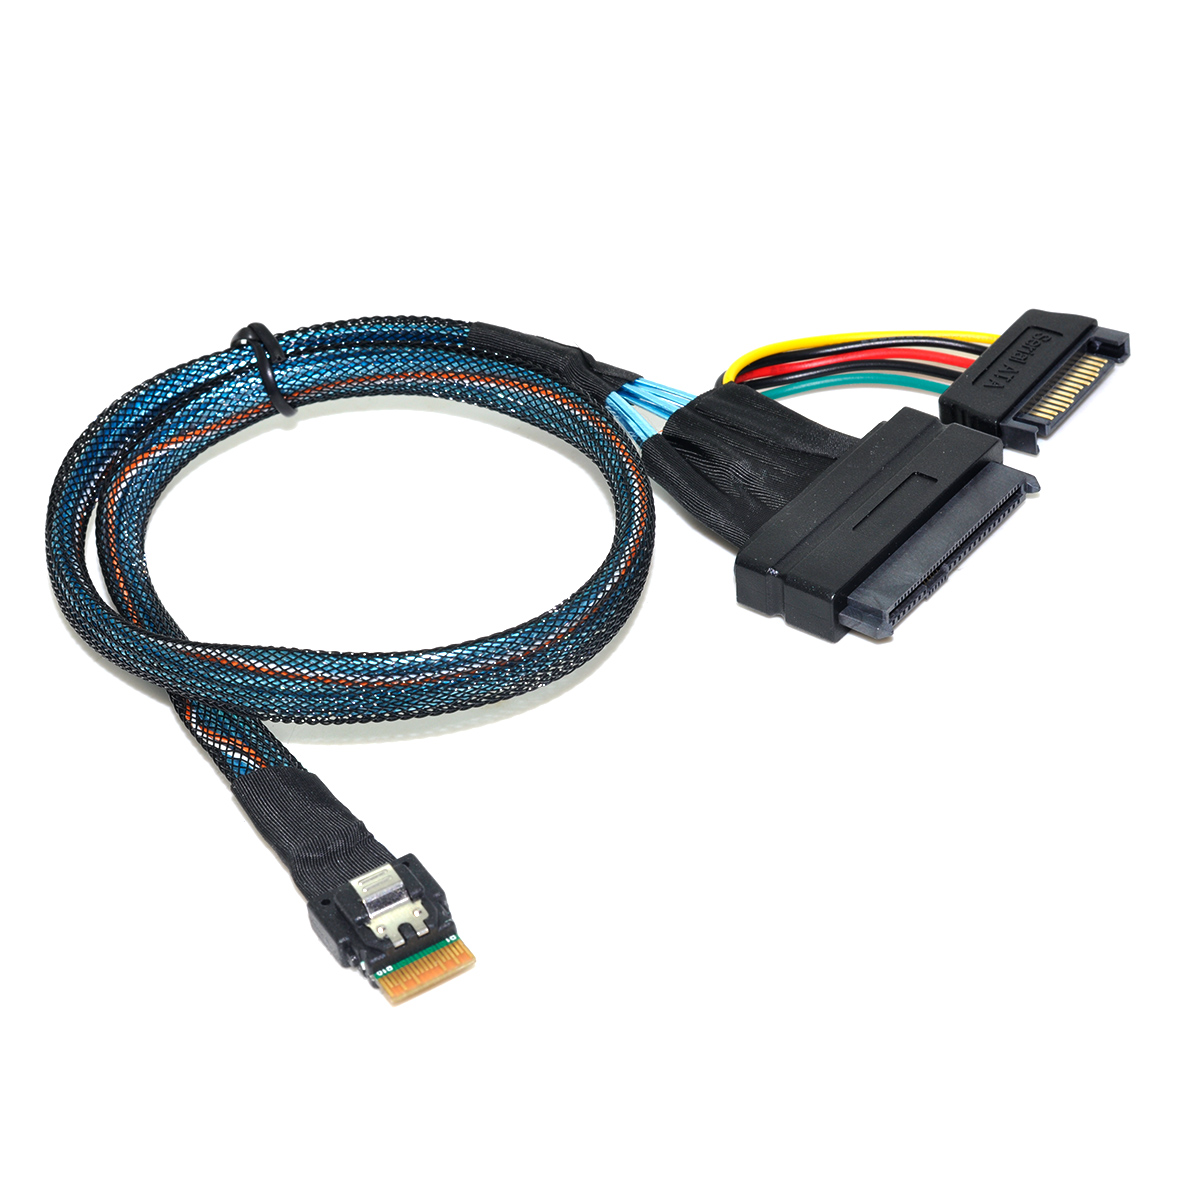 CableDeconn SFF 8654 4i Slimsas to SFF 8639 Hard Disk SSD Cable NVME U.2 with 15 Pin SATA Power Cable G0206